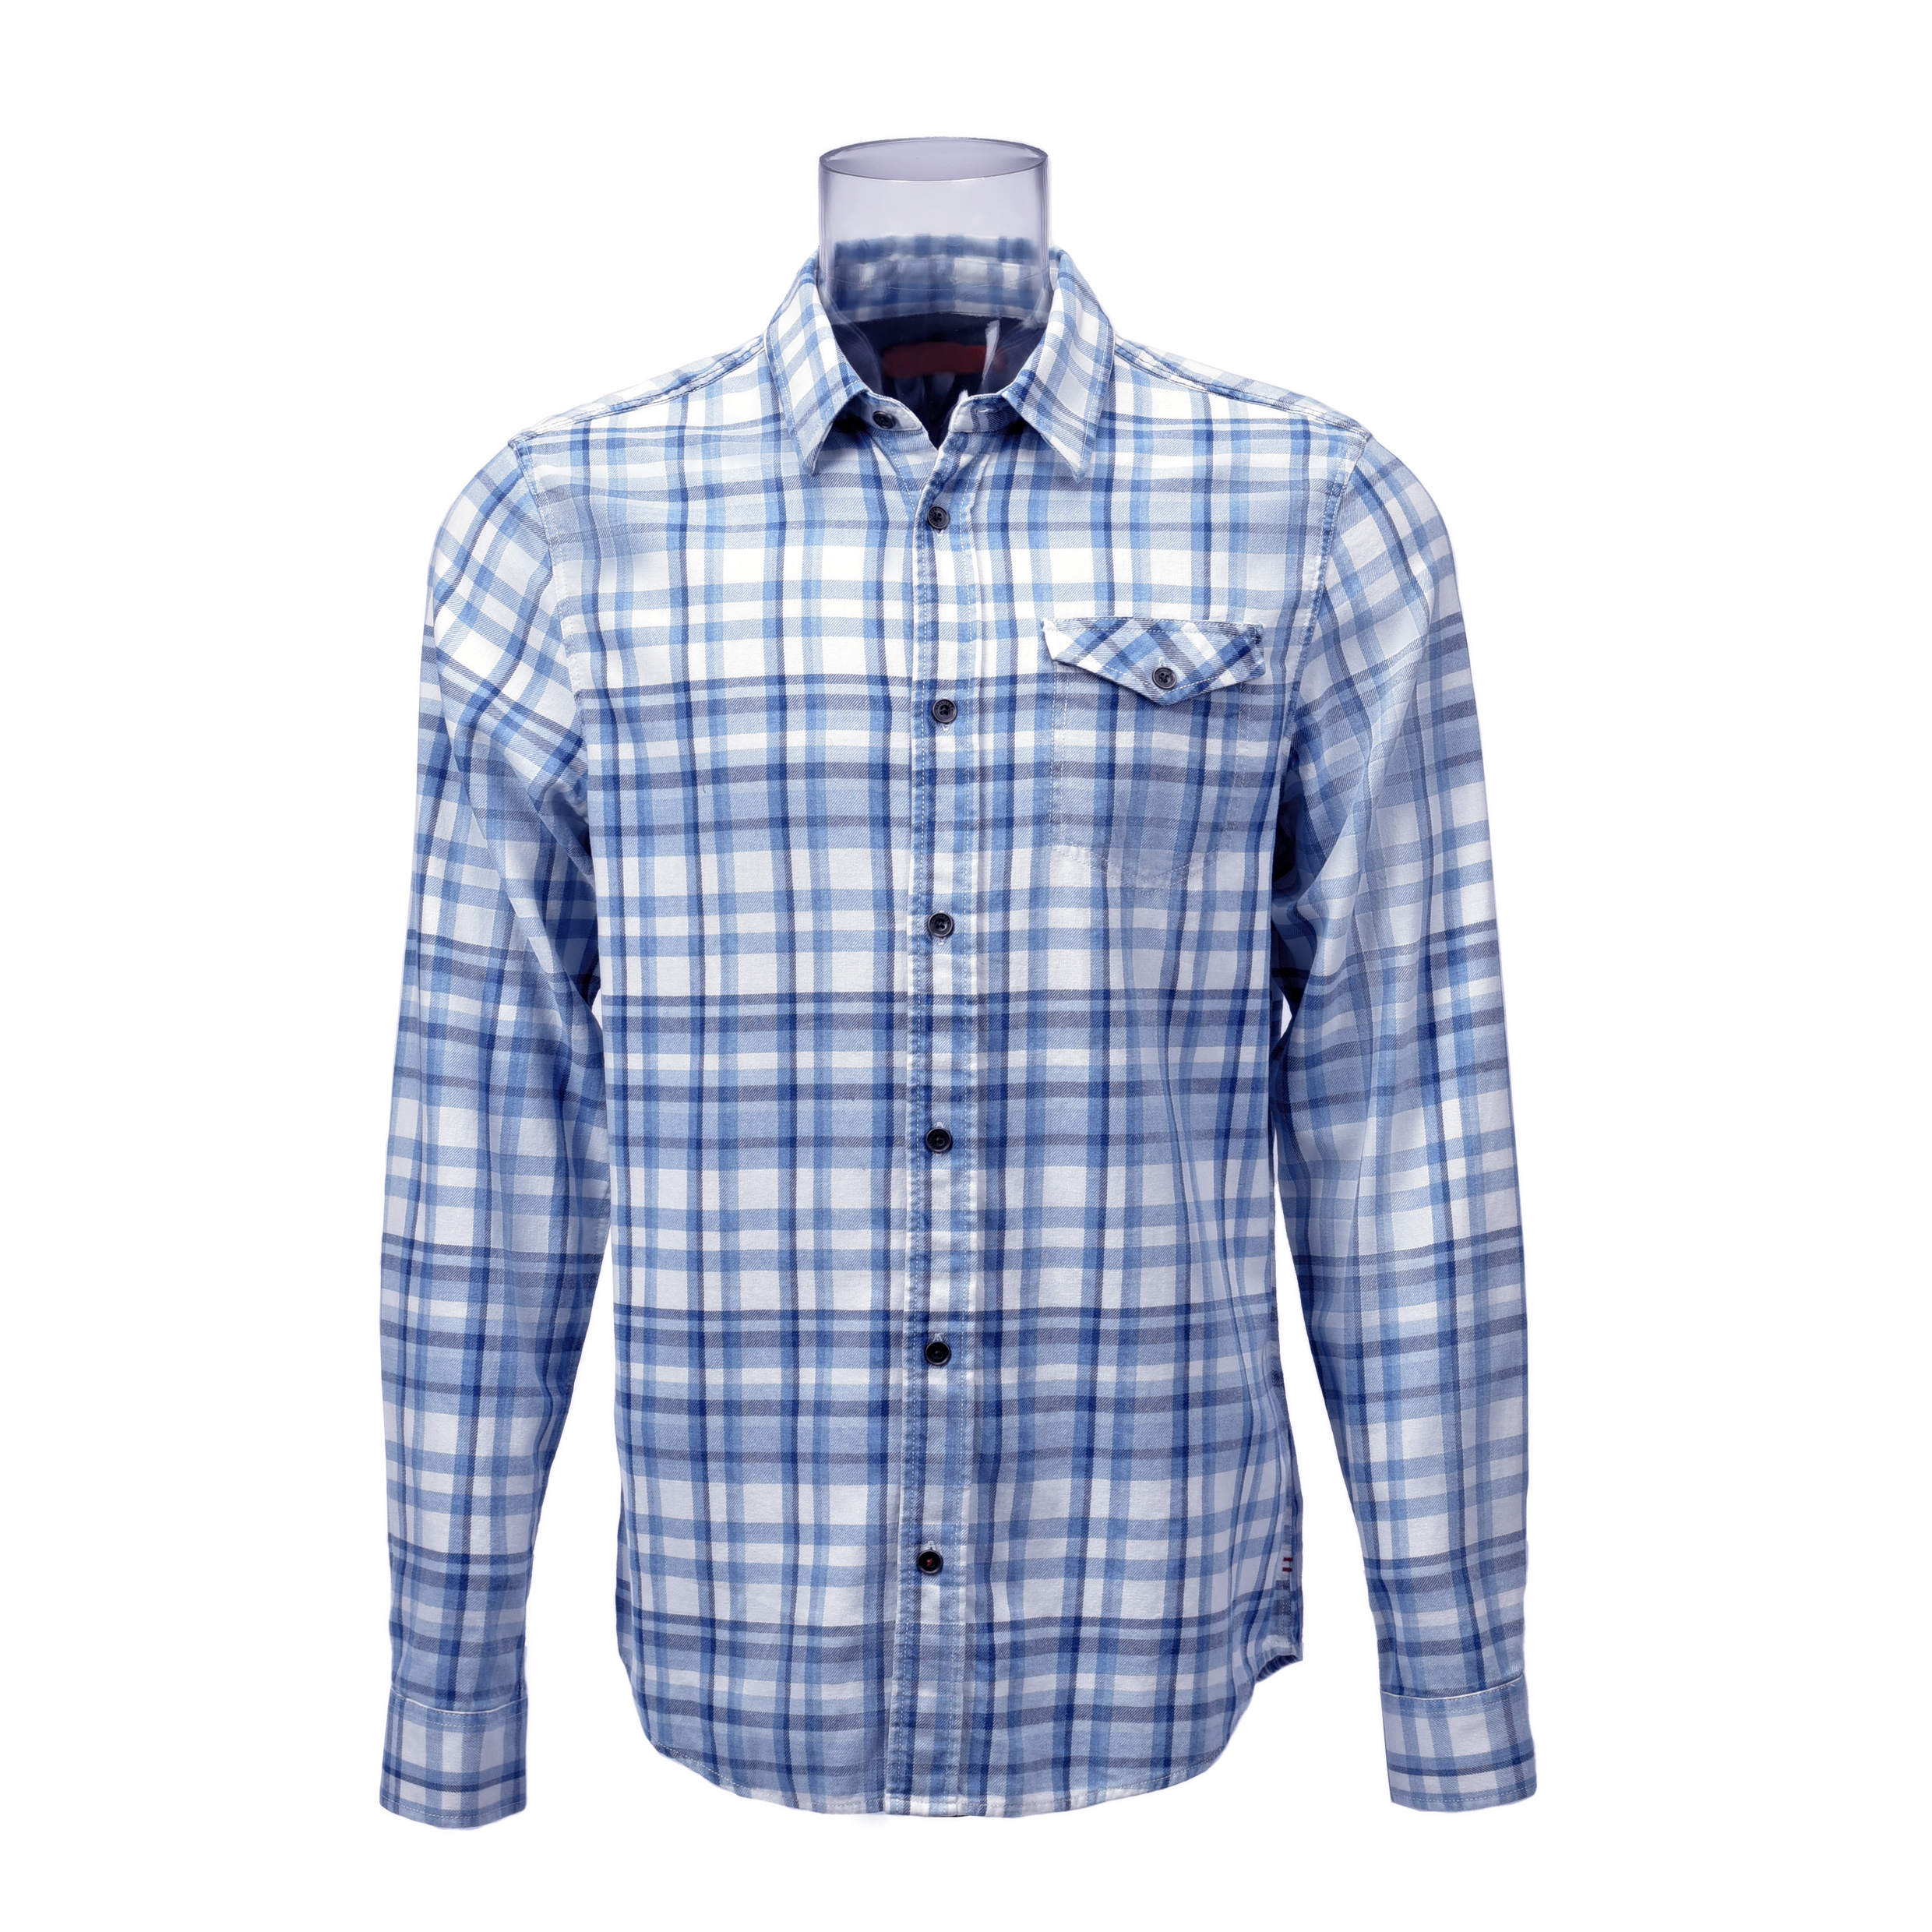 Men’s Shirt 100% Cotton Long Sleeve Blue And White Check Casual Flannel Shirt For Men GTCW107035G1